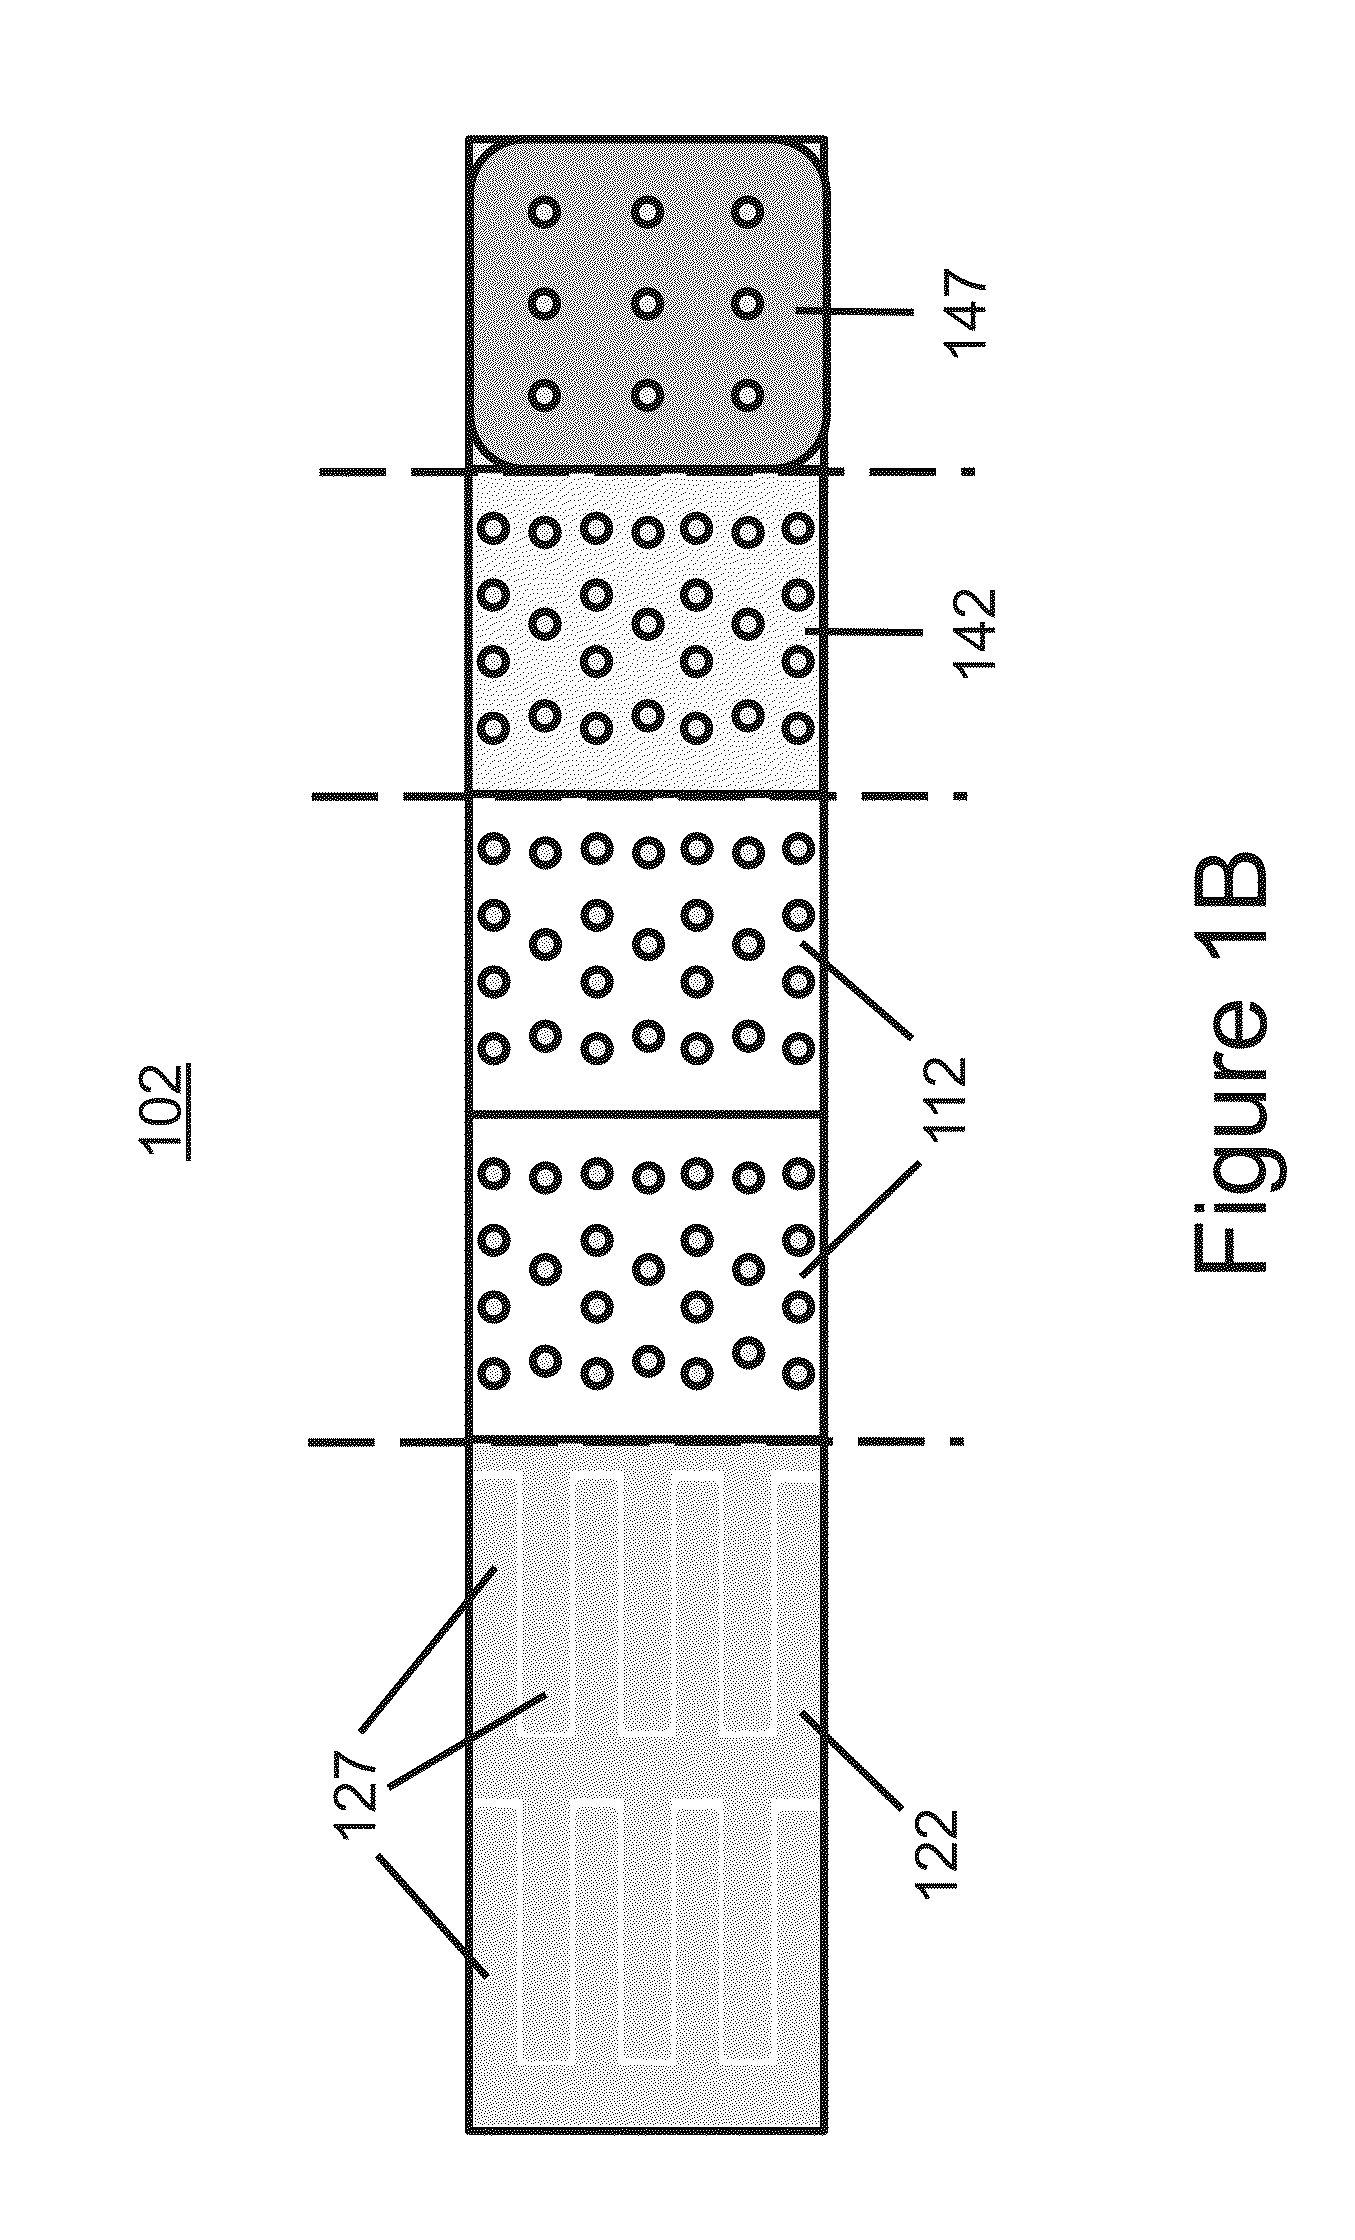 Interdigitated foil interconnect for rear-contact solar cells